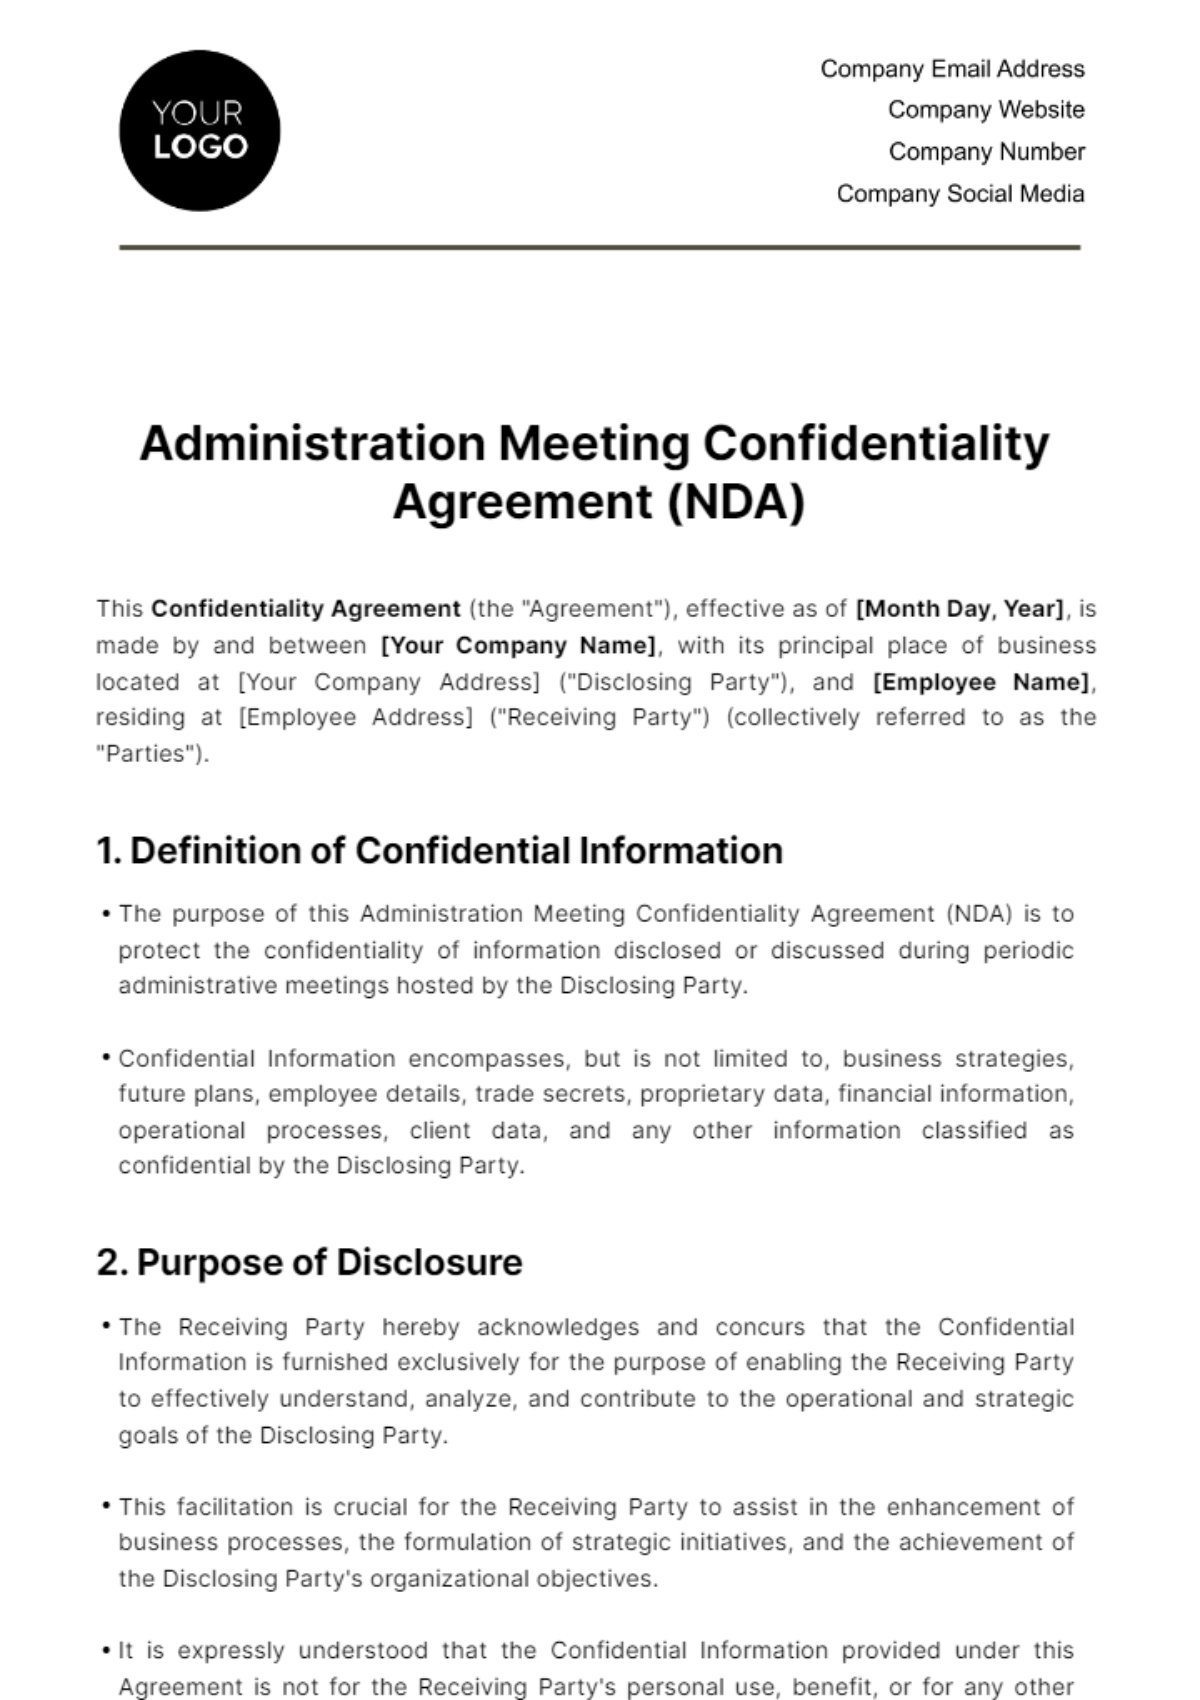 Administration Meeting Confidentiality Agreement (NDA) Template